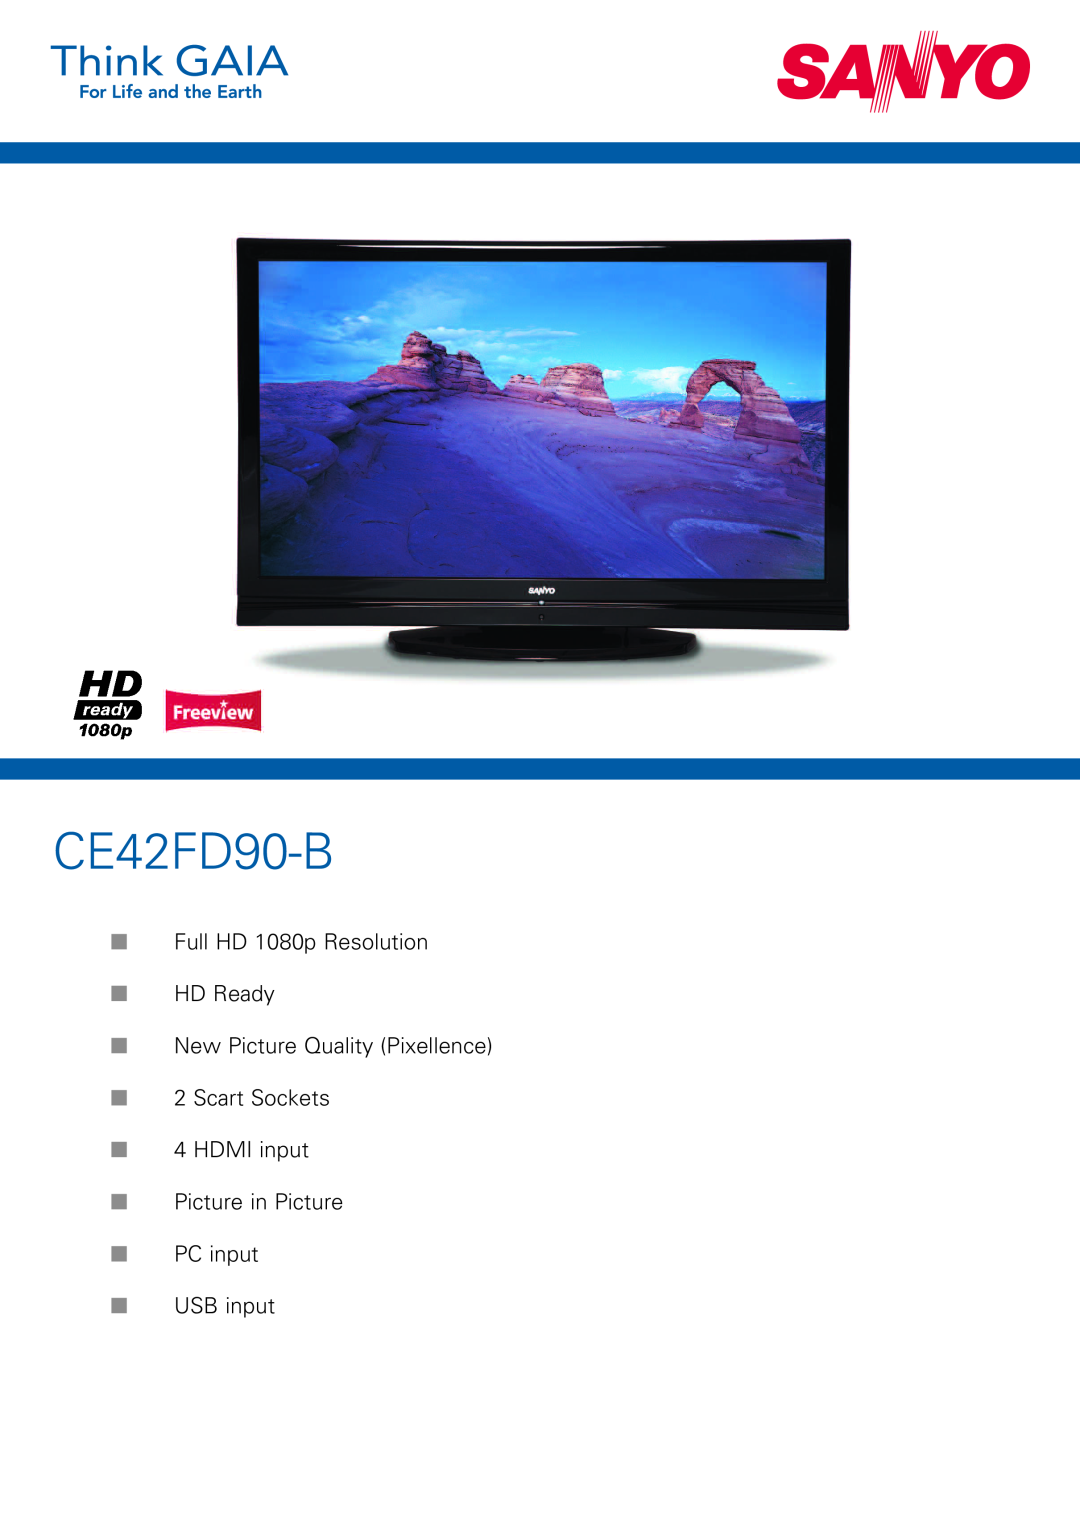 Sanyo CE42FD90-B manual Full HD 1080p Resolution HD Ready New Picture Quality Pixellence 